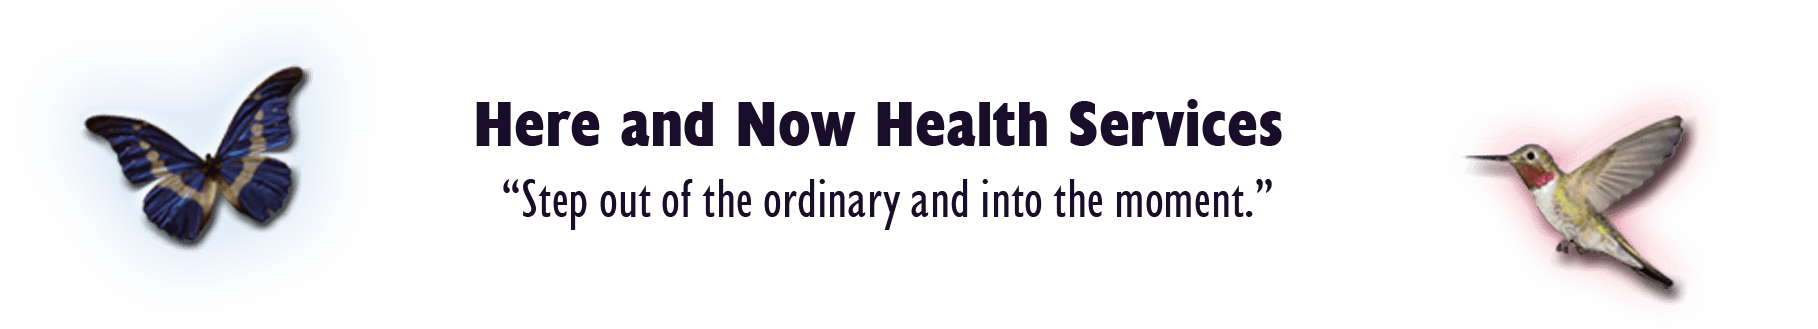 Here and Now Health Services